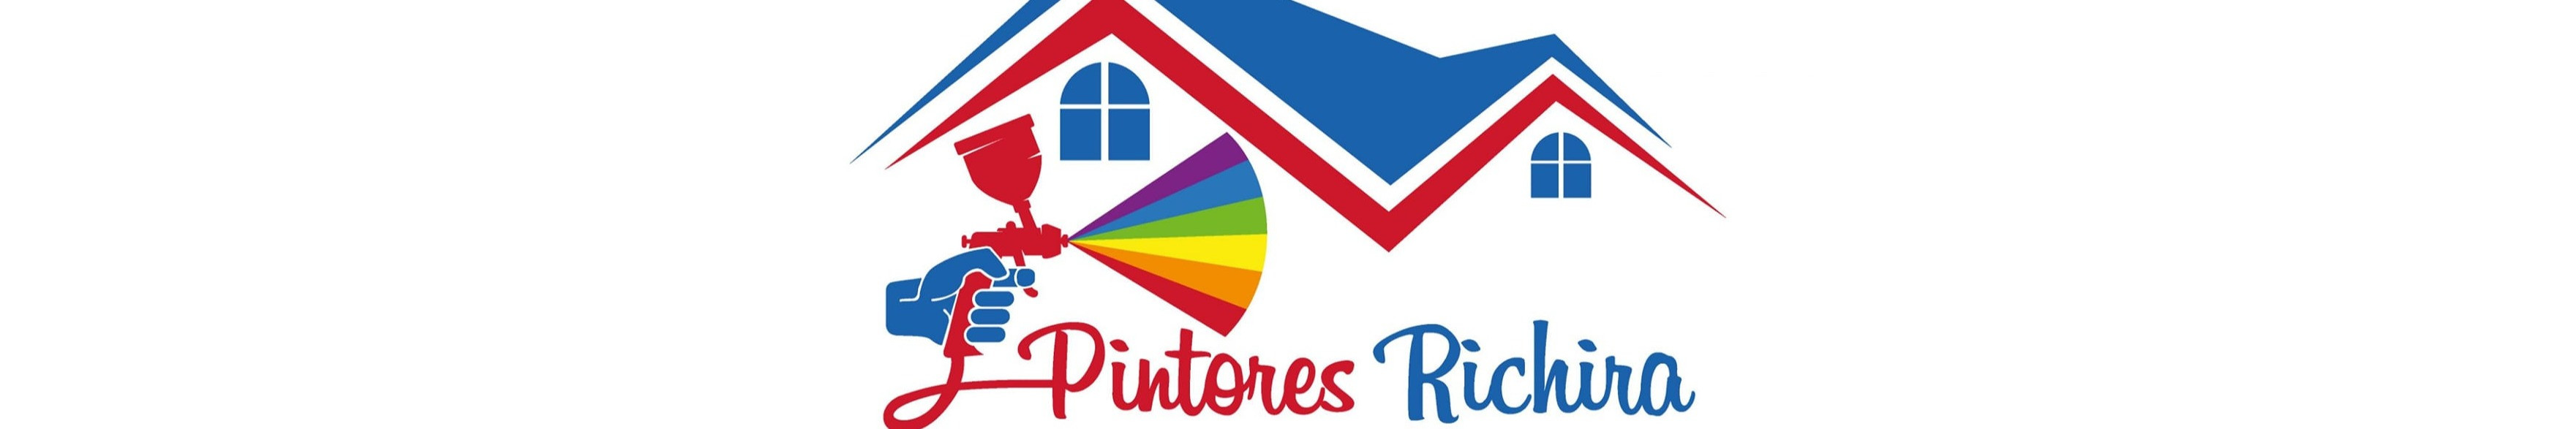 Pintores Richira House Painting